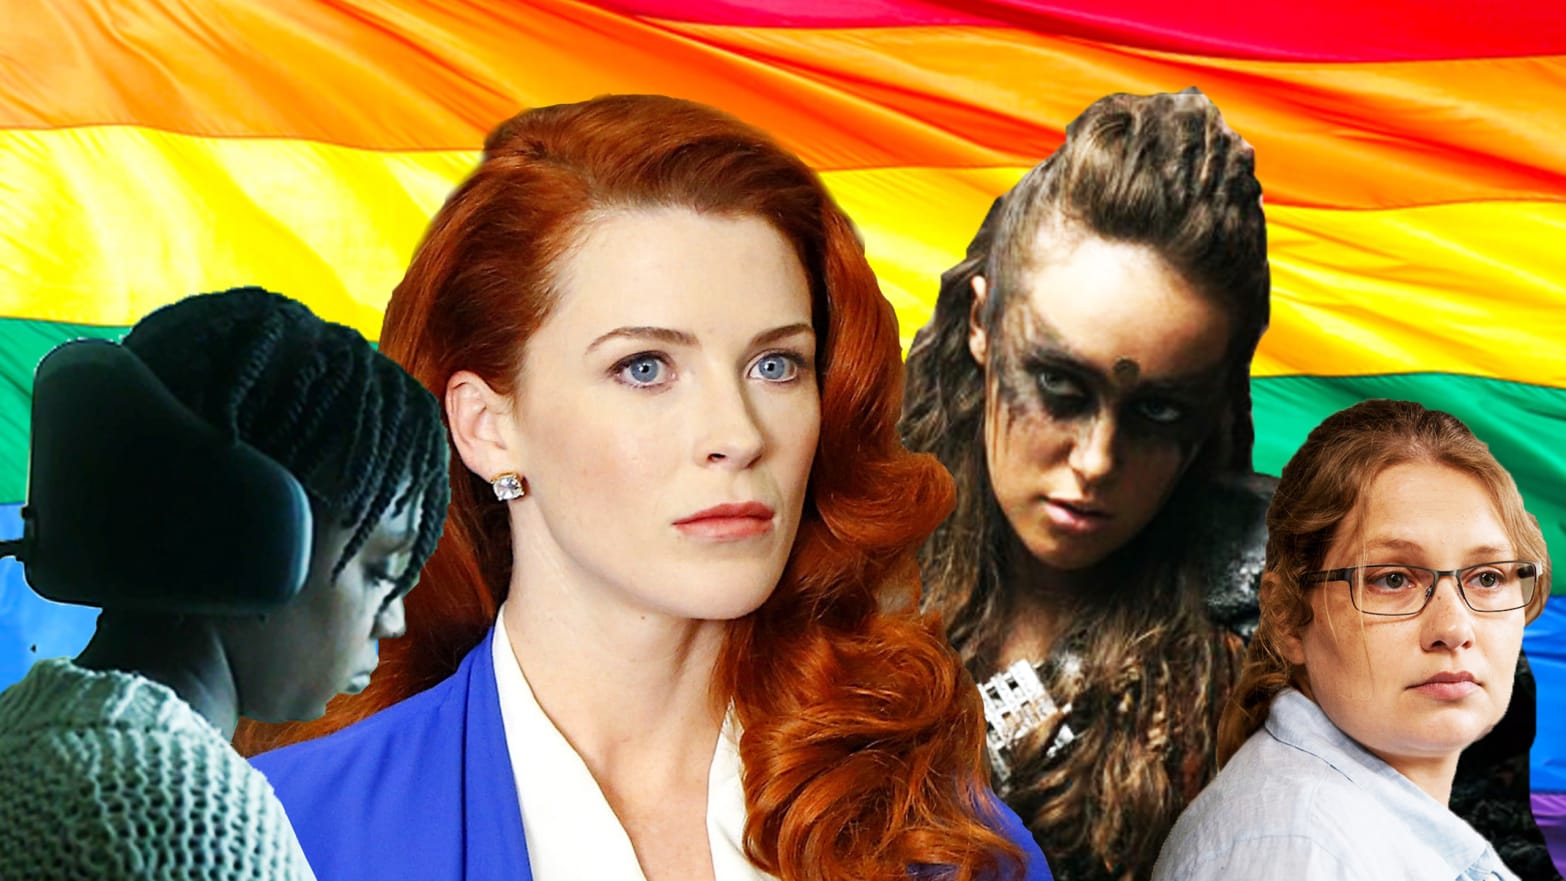 Hey, TV Producers Let LGBTQ Characters Live and Love Equally